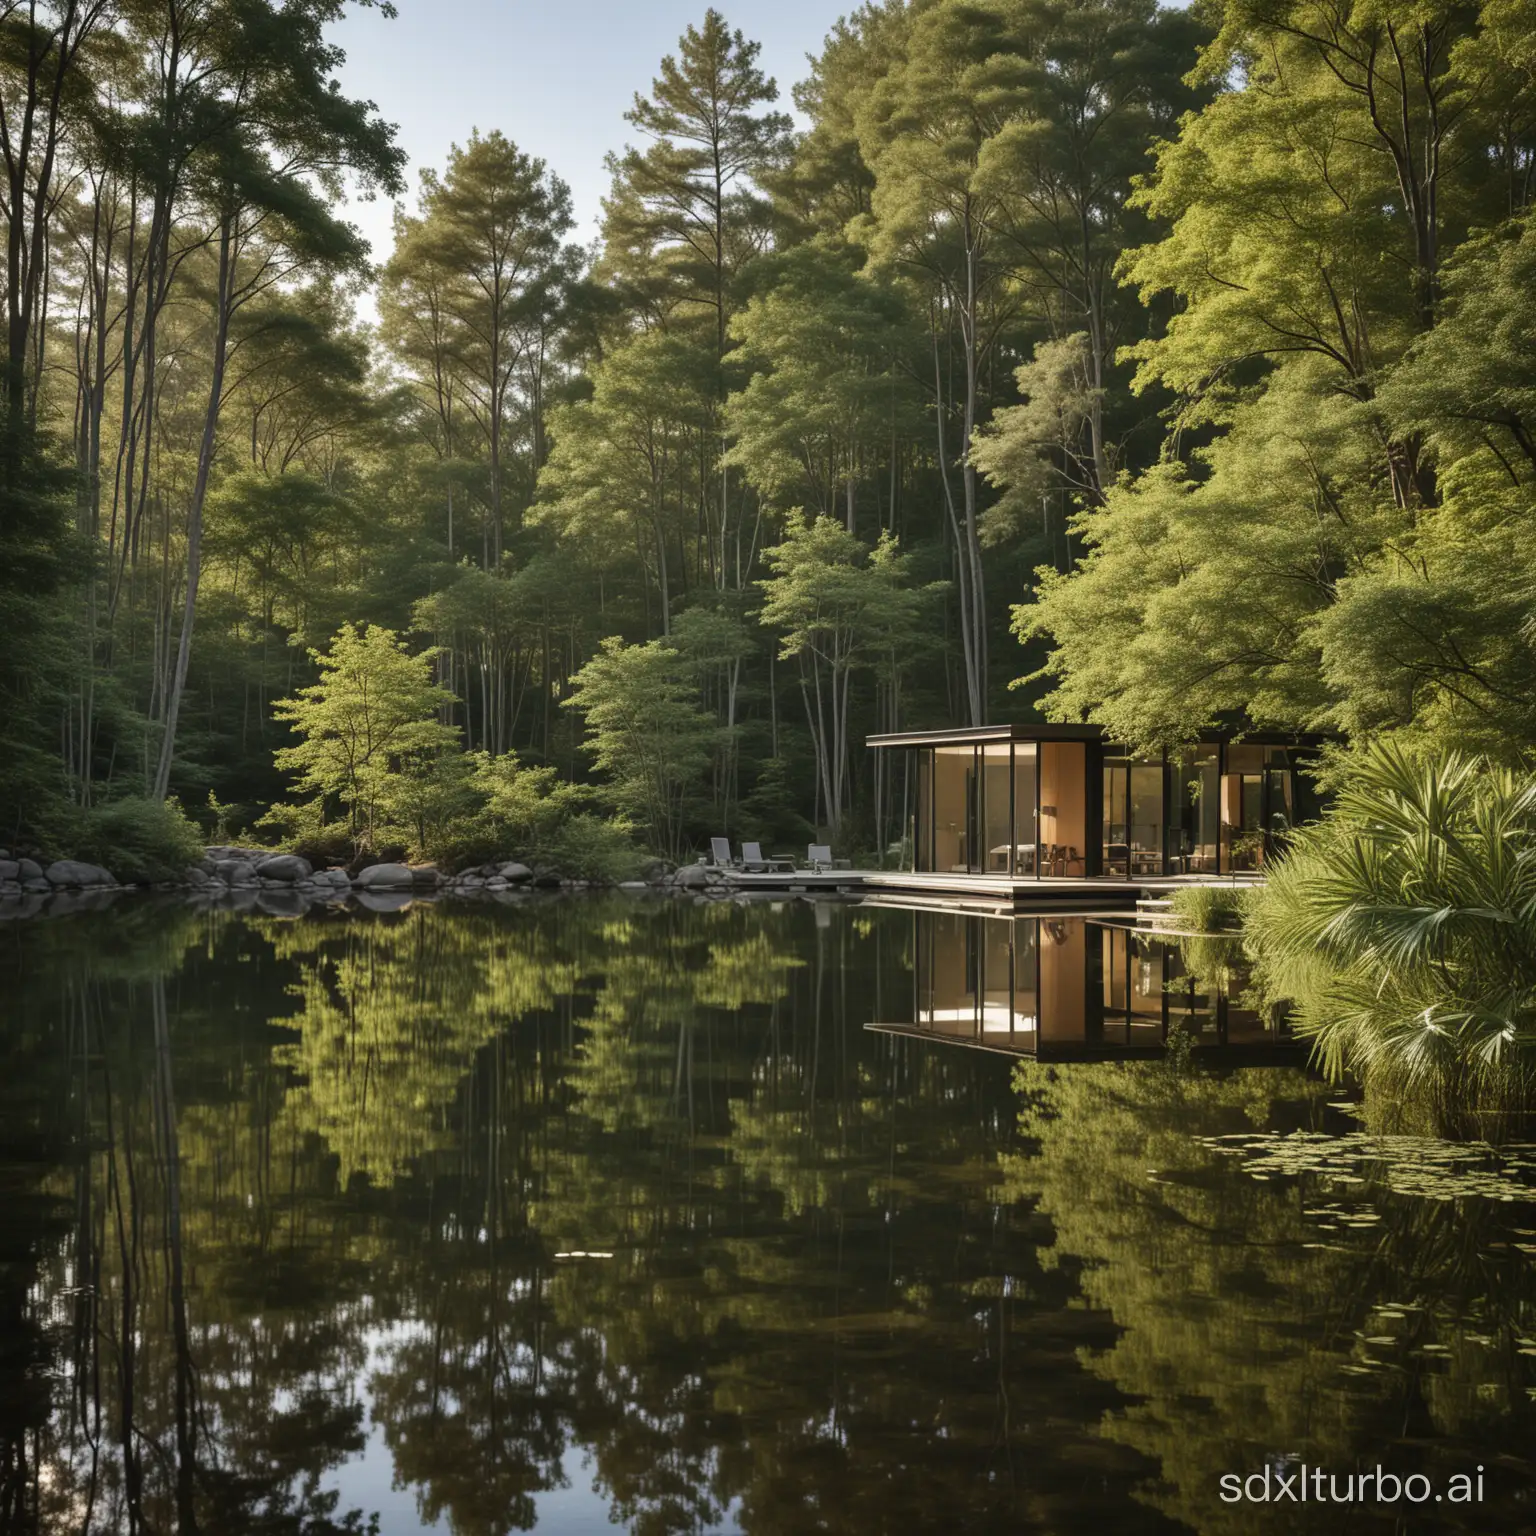 Tranquil-Lakeside-Retreat-Serene-Waters-Reflecting-Forest-Tranquility